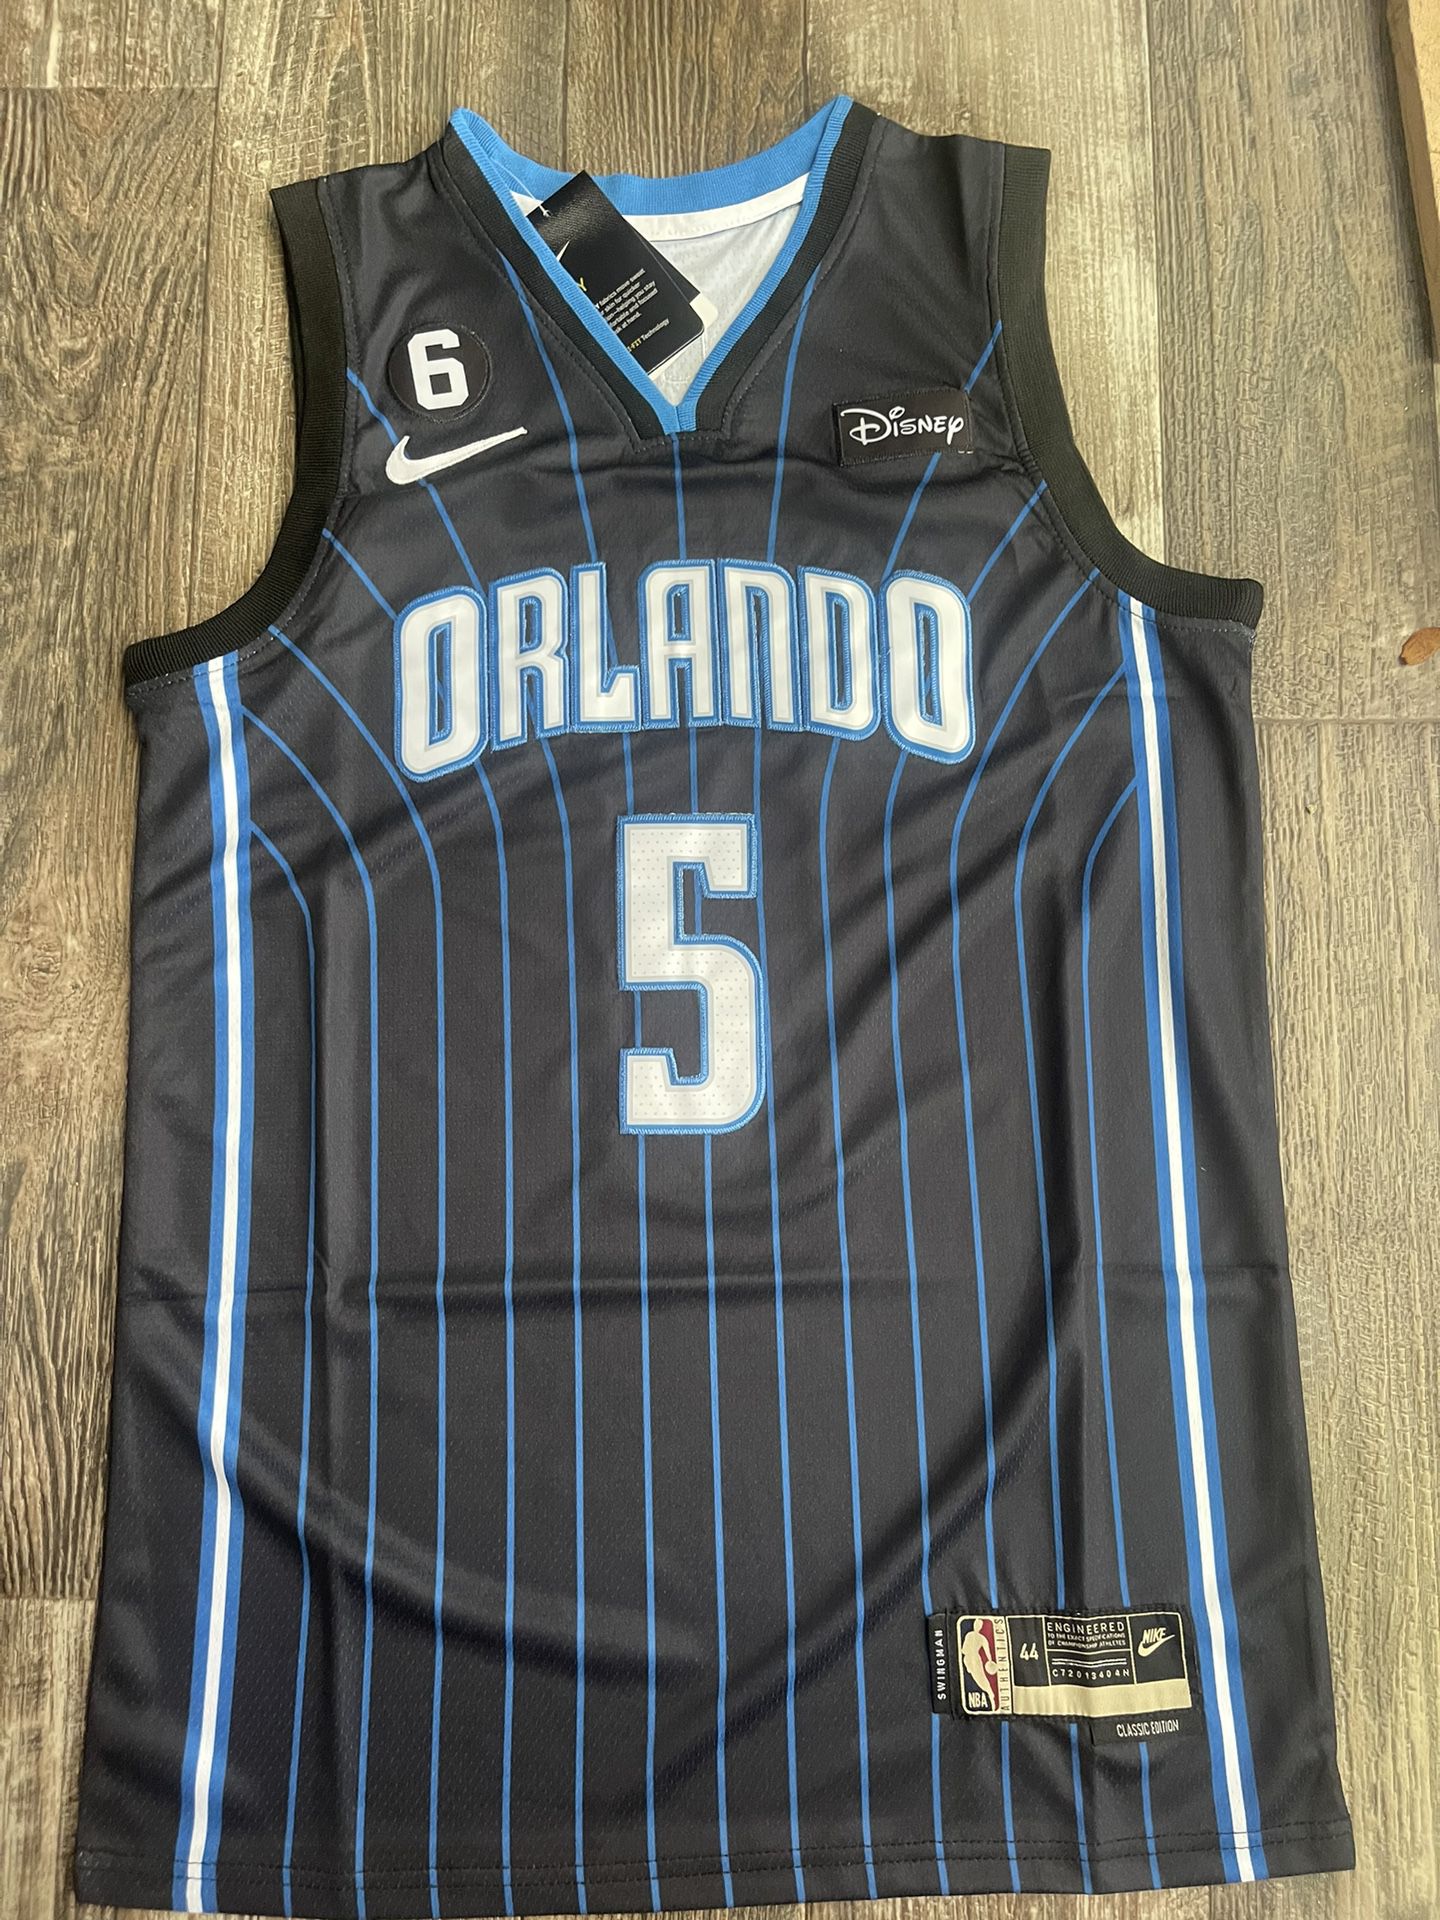 Paolo Banchero (MEDIUM) Orlando Magic Away Jersey for Sale in Raleigh, NC -  OfferUp